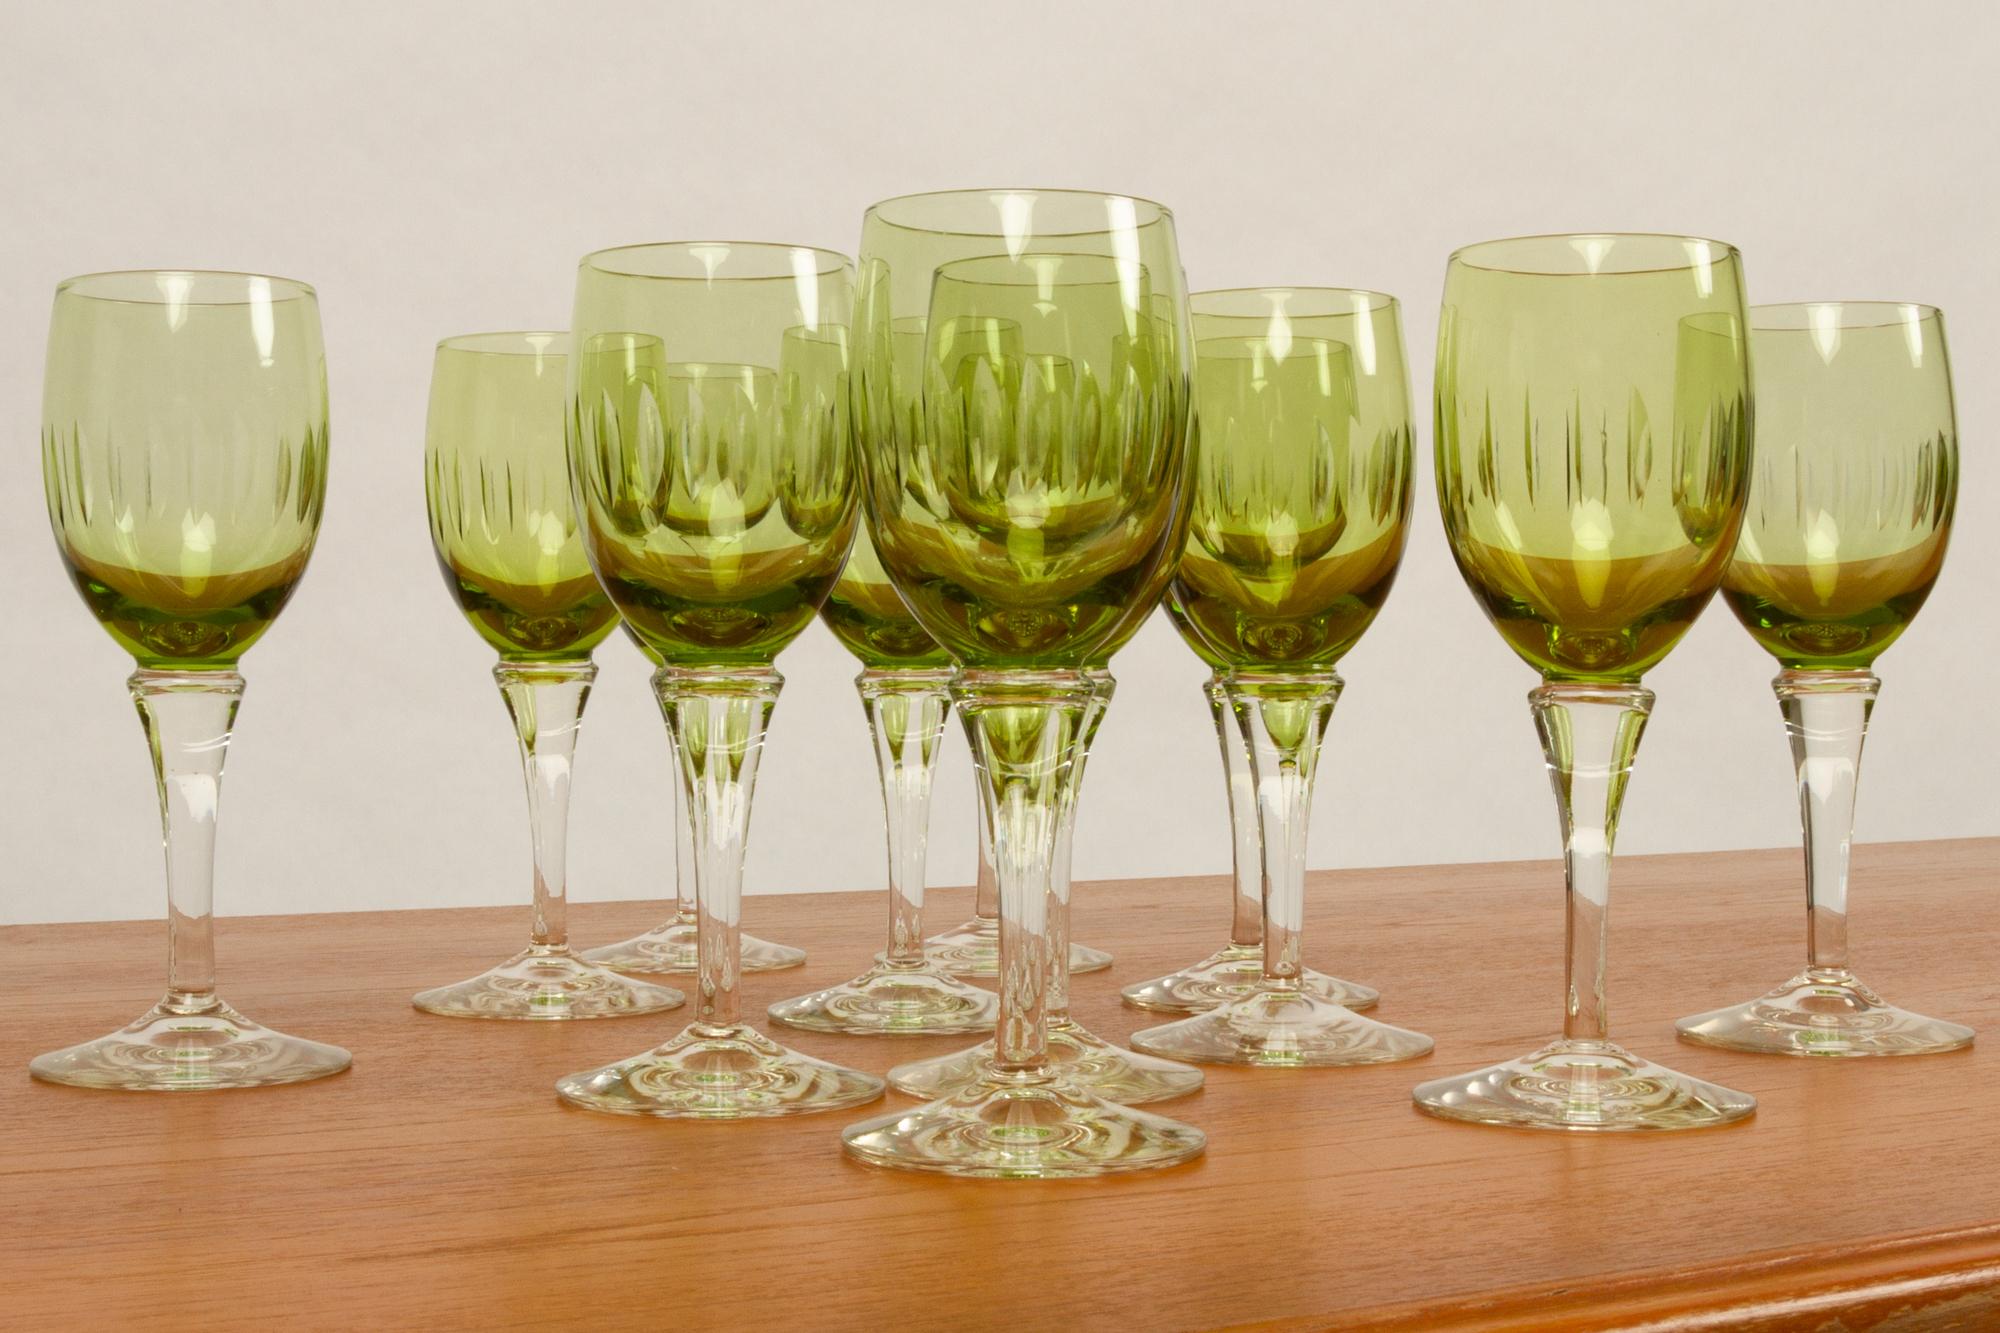 Vintage Danish green wine glasses Leonora, 1960s
12 glasses for white wine designed by Christer Holmgren for Holmegaard Glassworks in 1964. Made between 1964 and 1970. Measures: Height 15cm.
Very good condition. No chips or cracks.